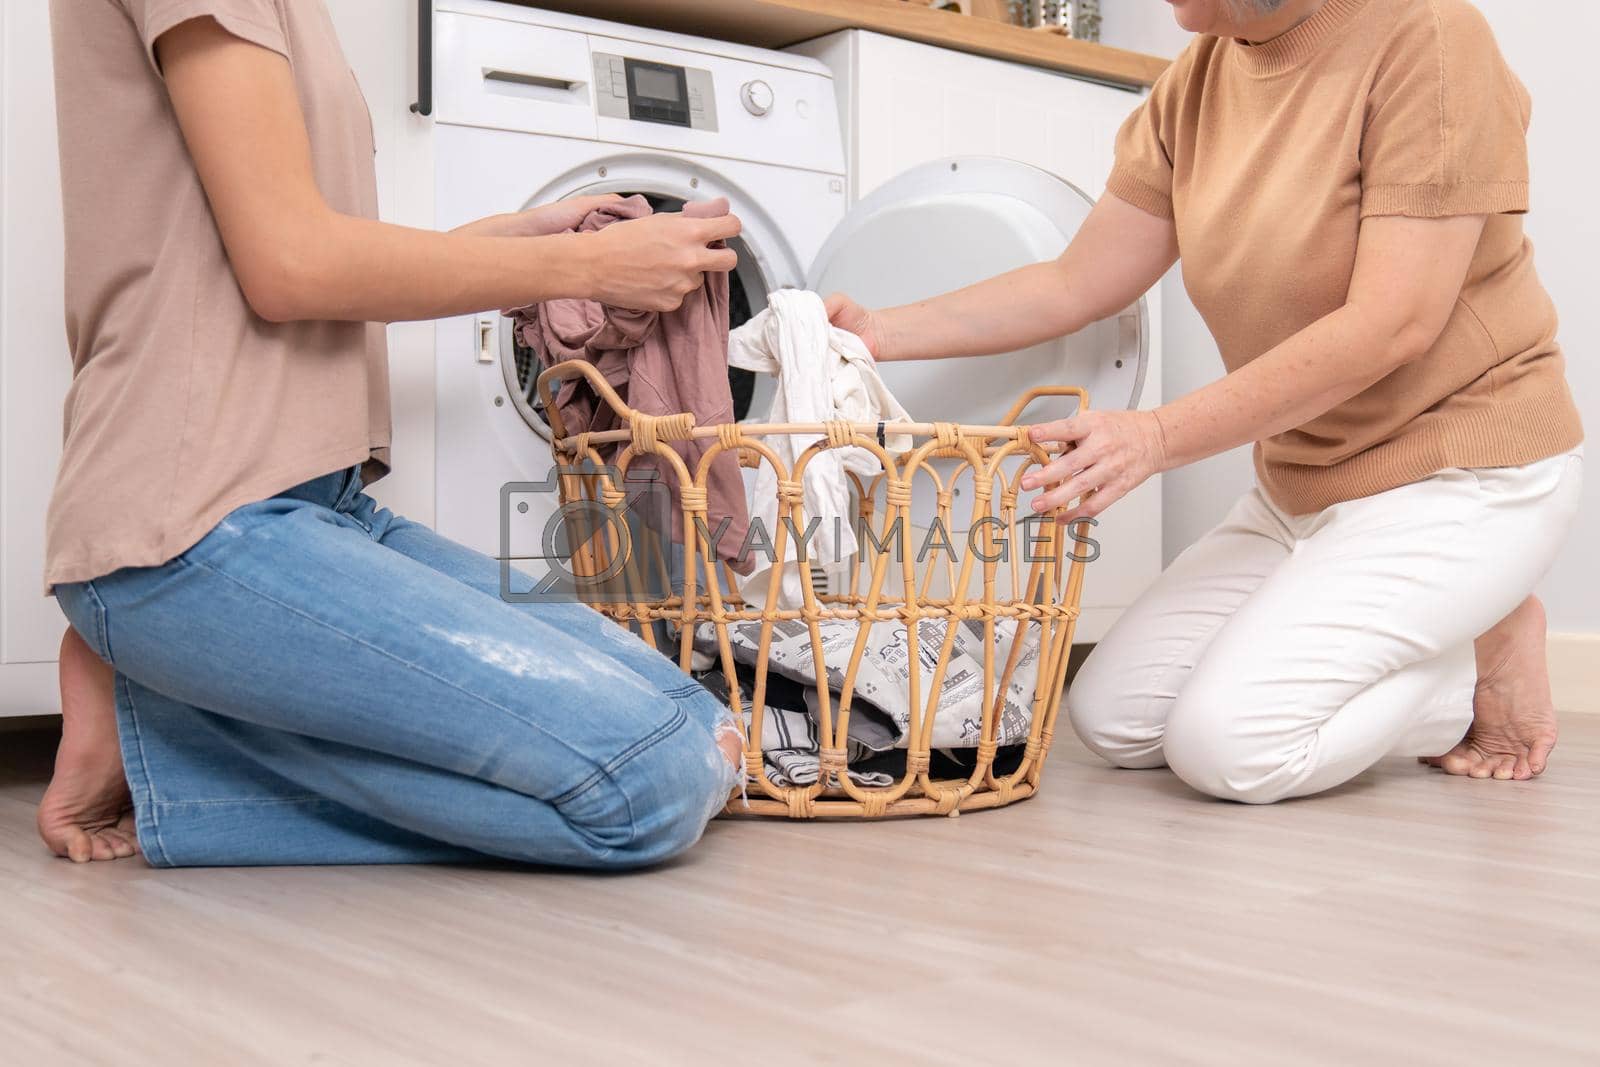 Royalty free image of Contented daughter and mother in the household washing room working together. by biancoblue